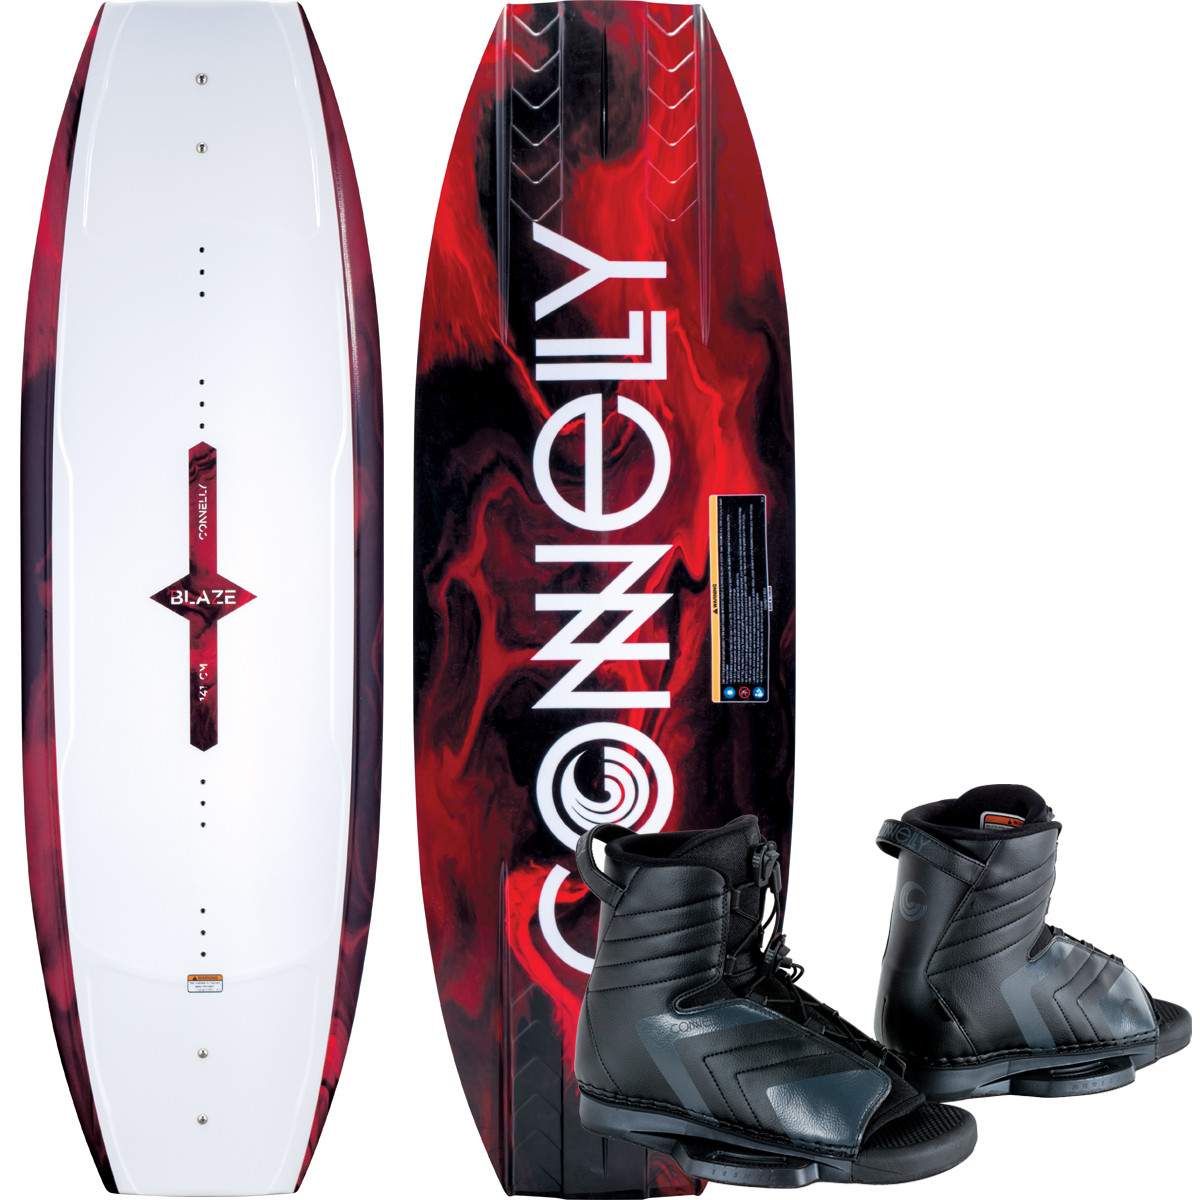 Connelly Blaze 141 Wakeboard Package with Optima Boots for the Lowest Price  at RIDE THE WAVE